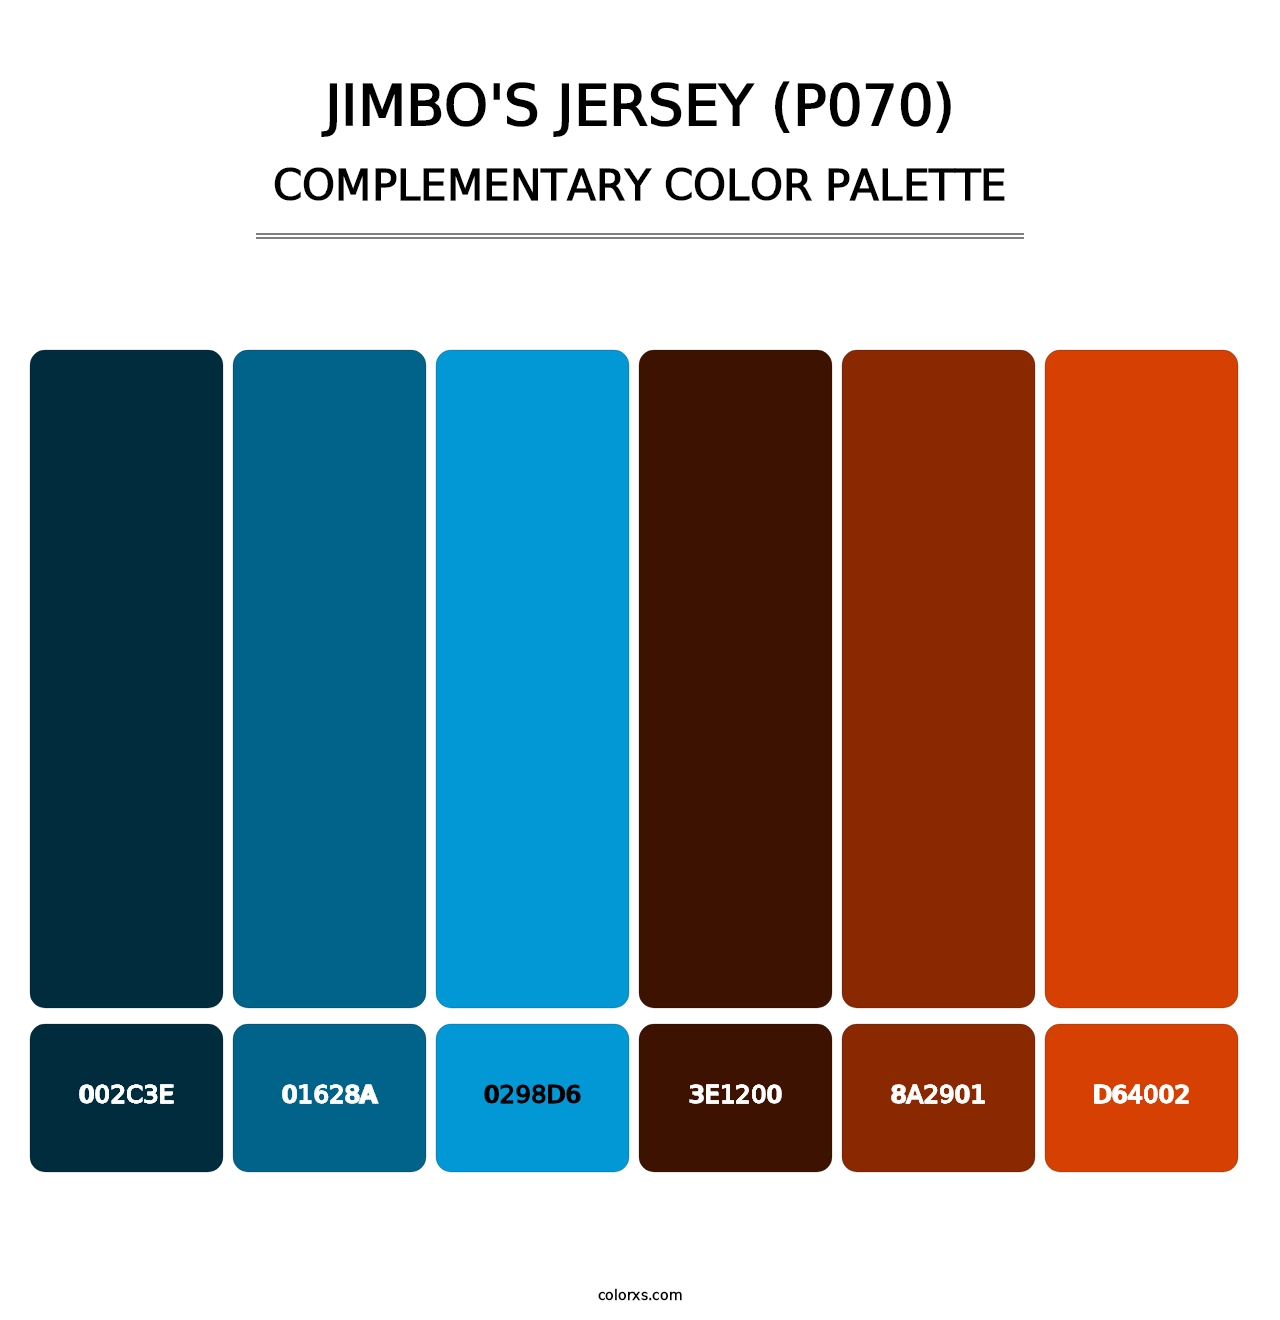 Jimbo's Jersey (P070) - Complementary Color Palette